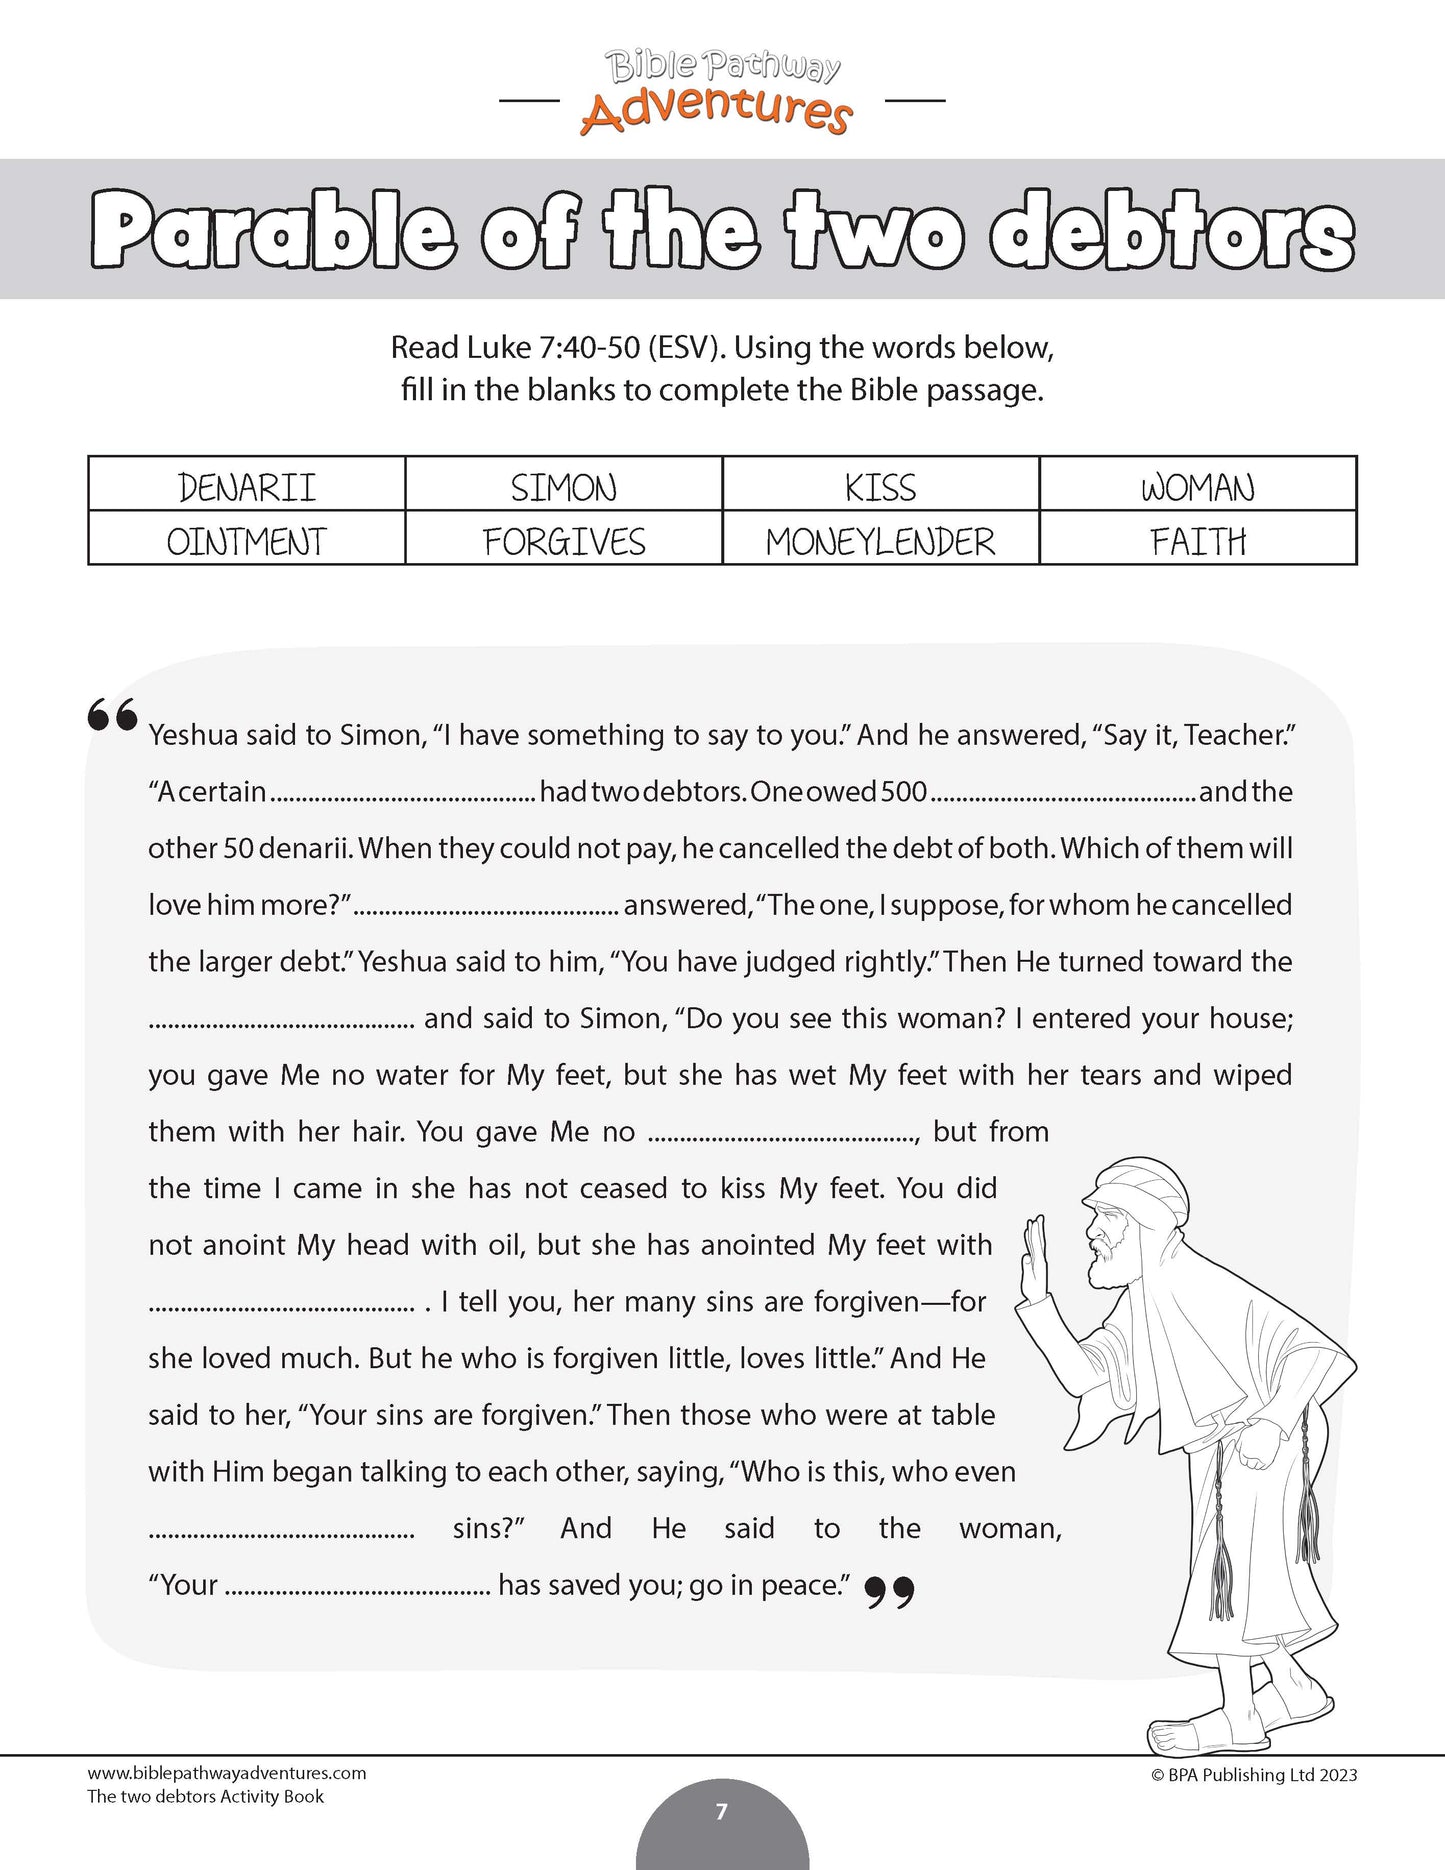 Parable of the Two Debtors Activity Book (PDF)